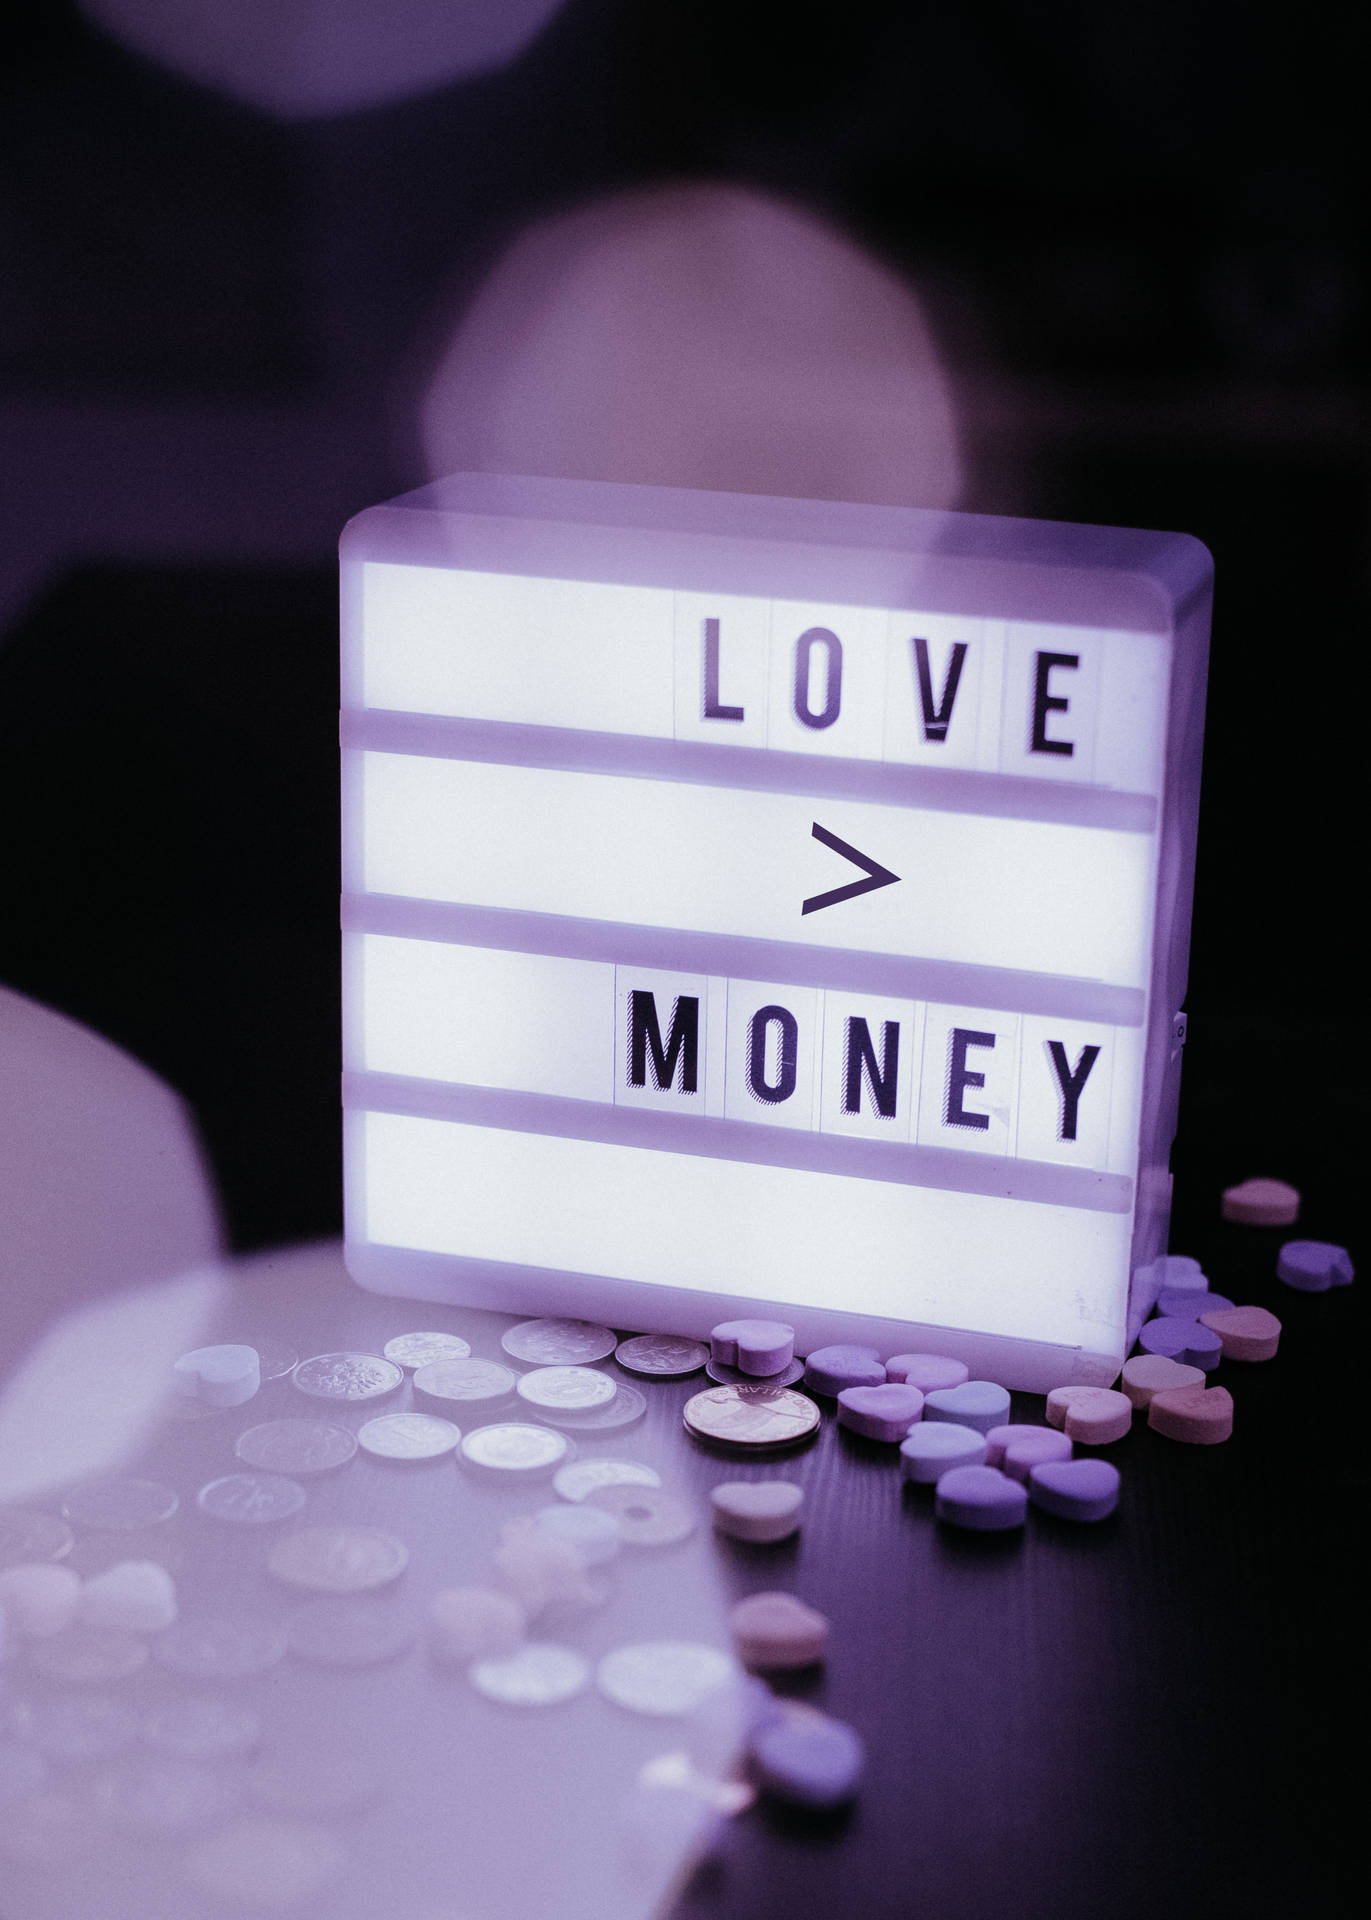 Money Is Temporary, Love Is Forever Wallpaper